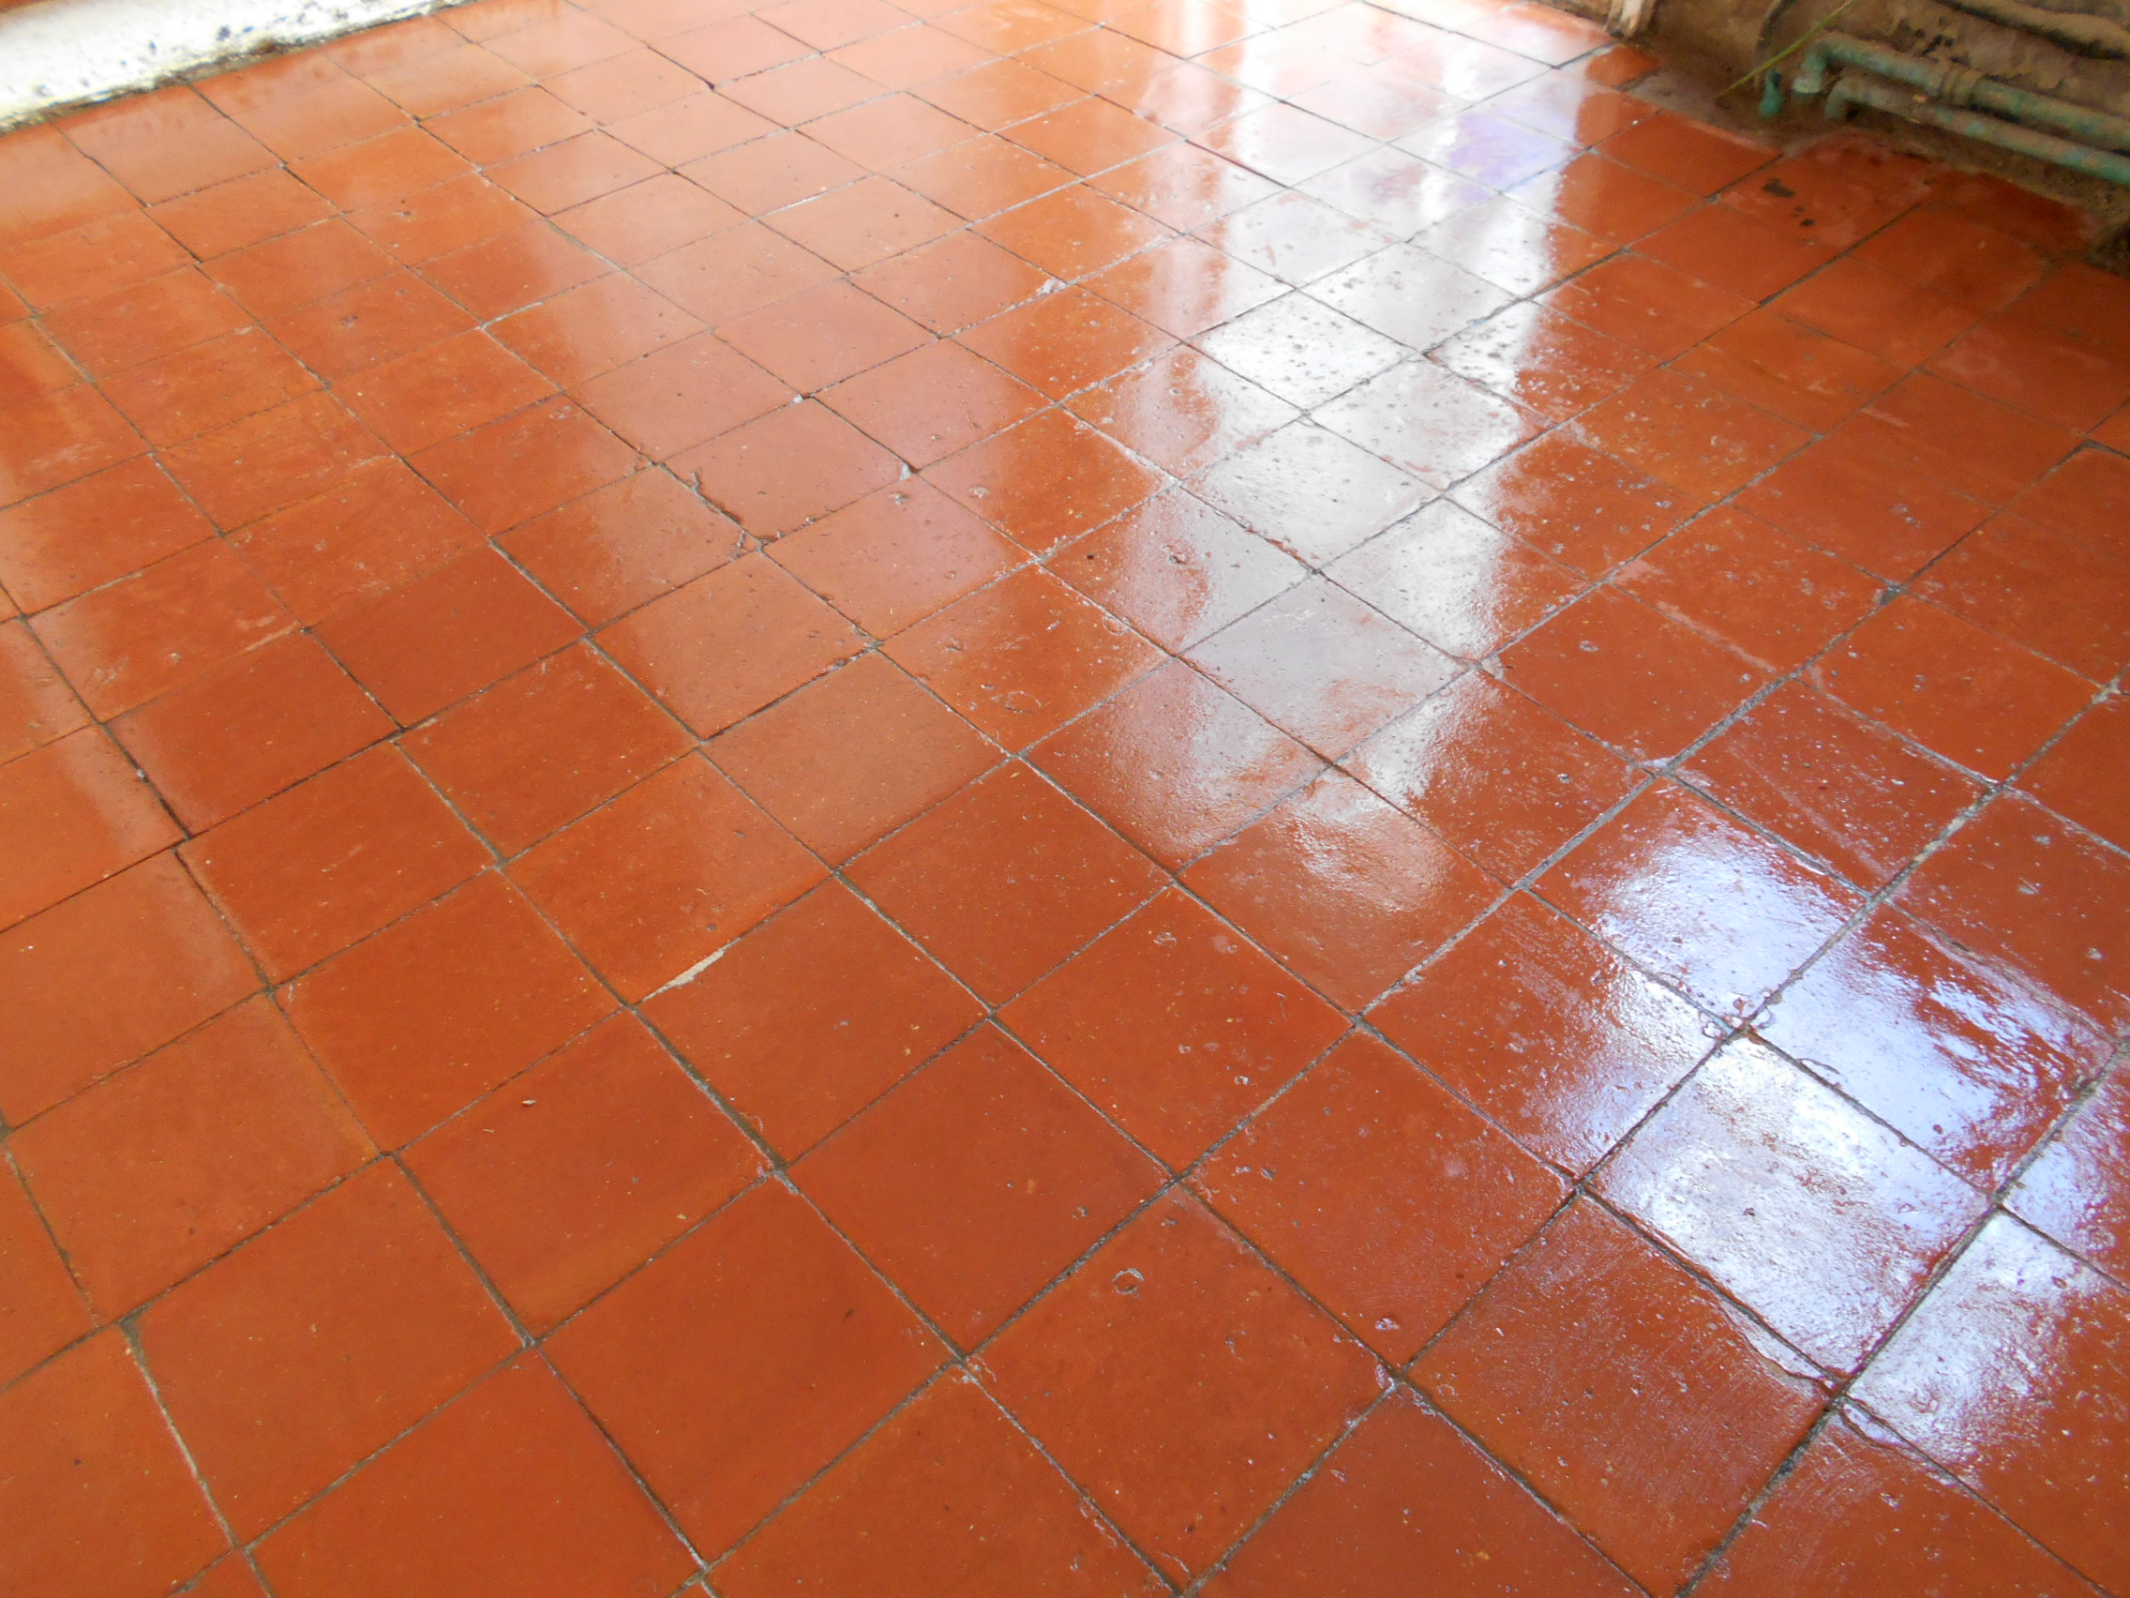 quarry tiles cleaned and waxed Buckinghamshire